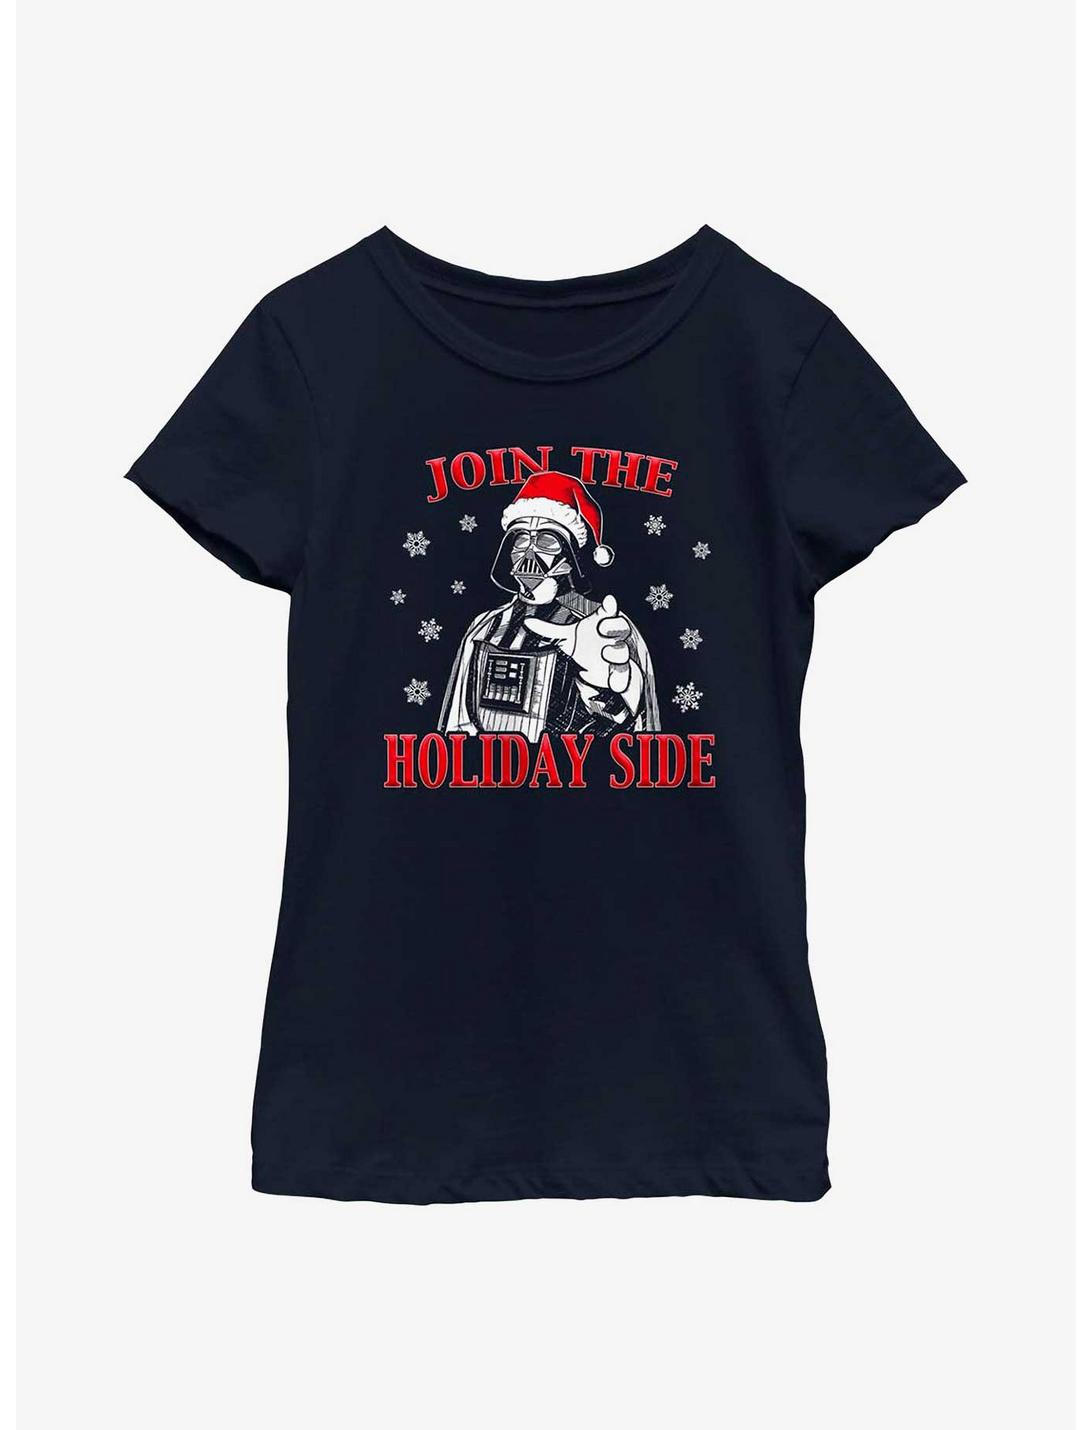 Star Wars Join The Holiday Side Youth Girls T-Shirt, NAVY, hi-res